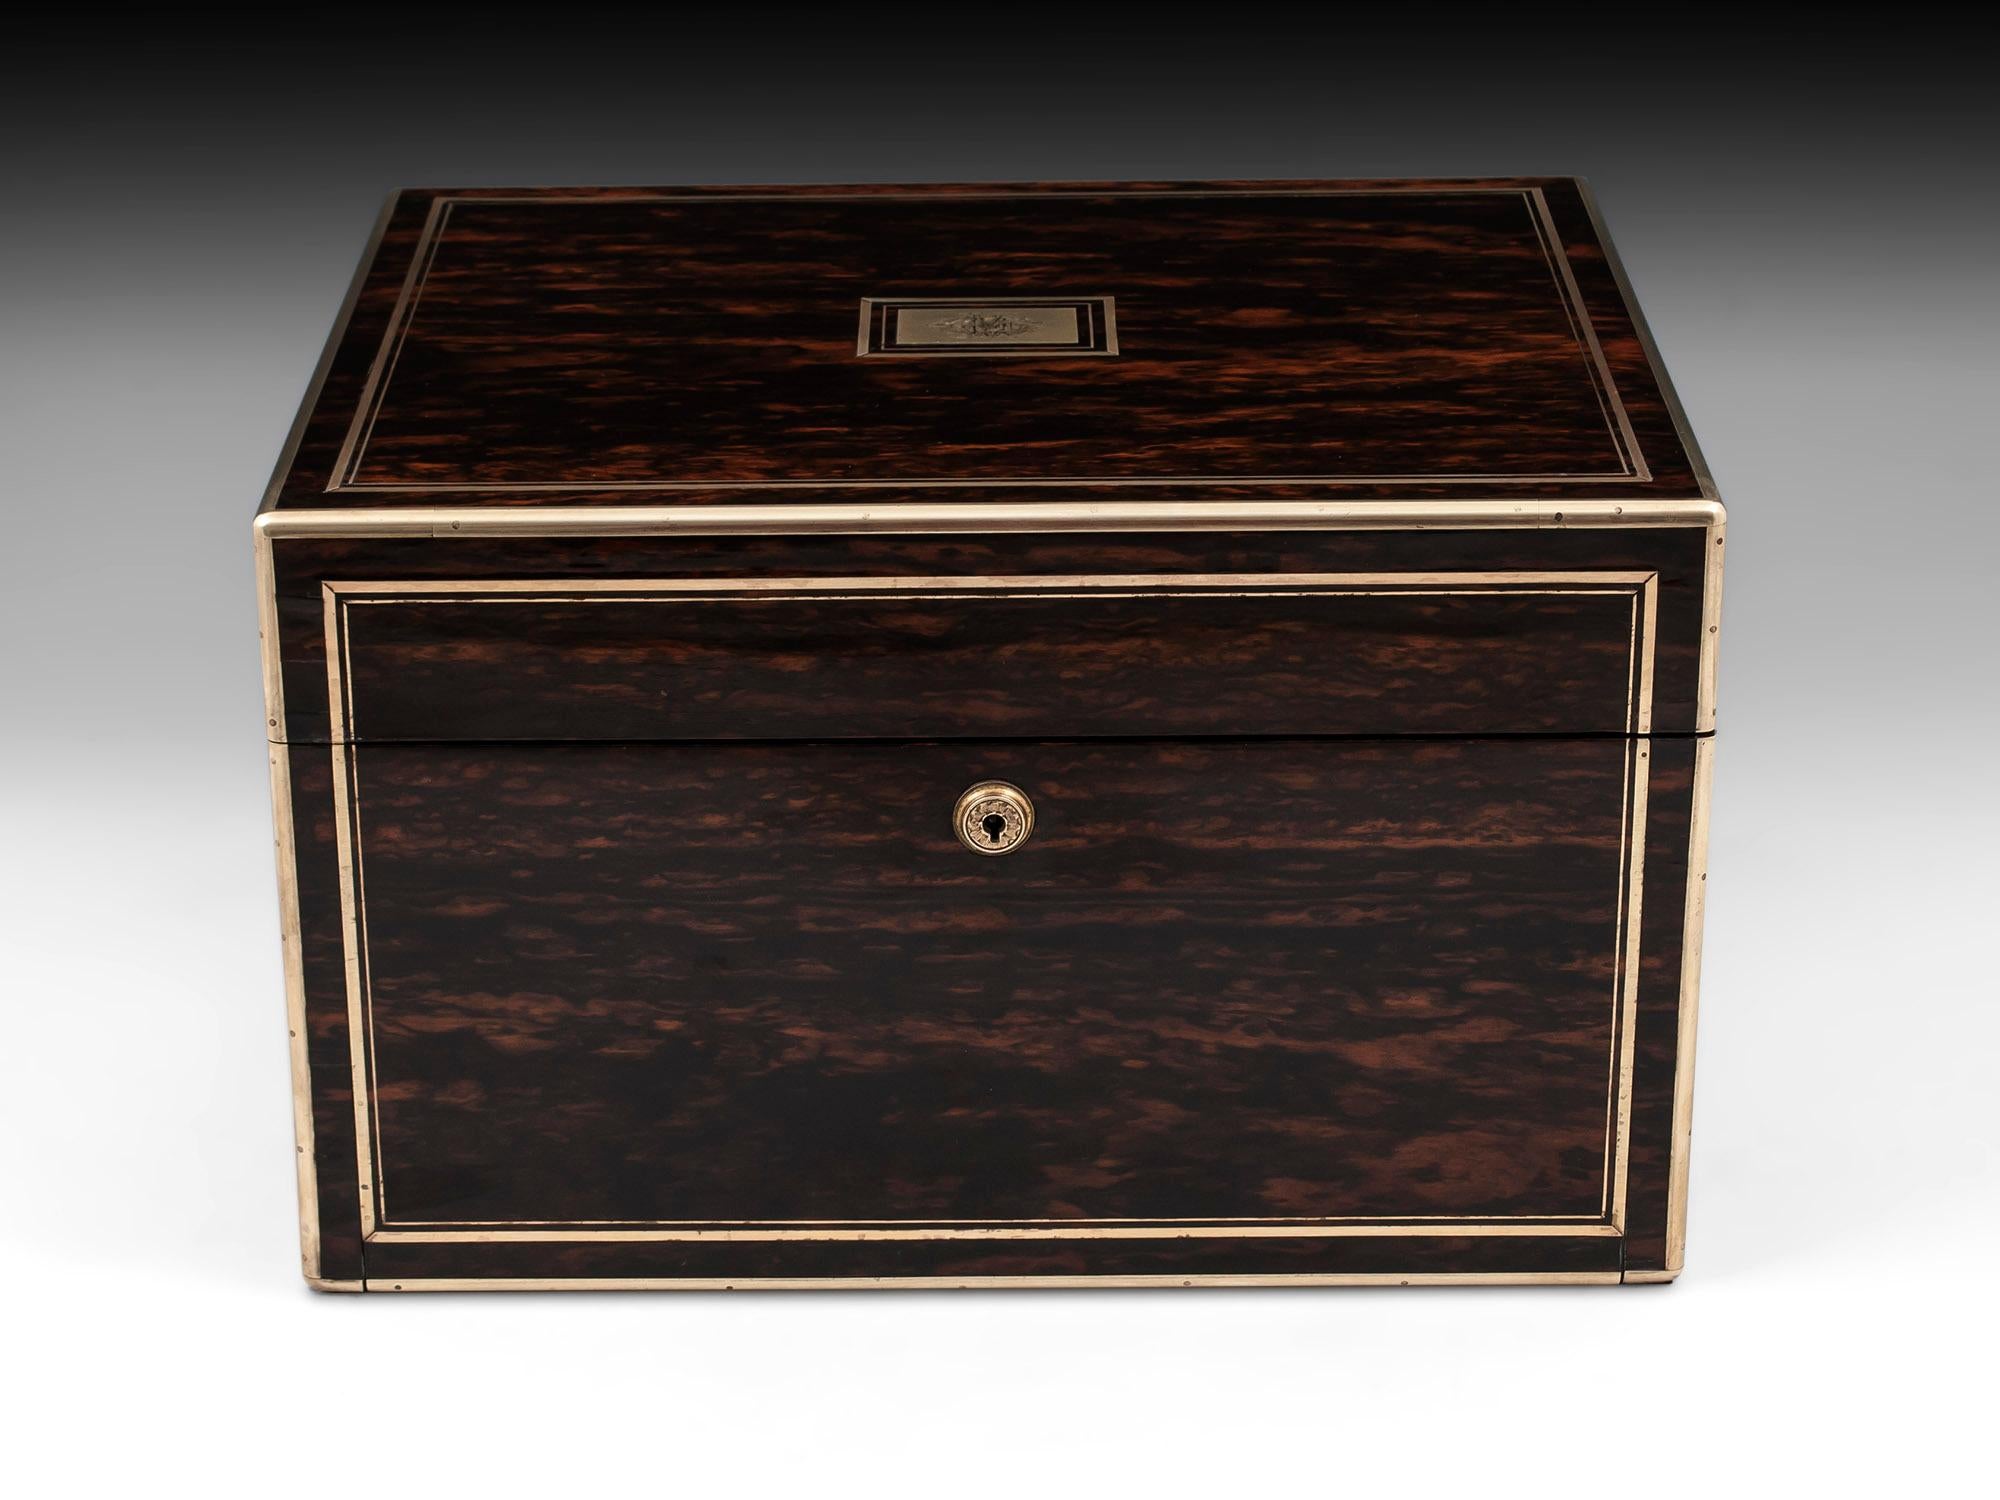 Sterling Silver Vanity box veneered in stunning coromandel, bound and double strung in brass, with robust campaign carry-handles and engraved escutcheon. The interior features twelve hobnail-cut glass containers with elaborately engraved silver lids